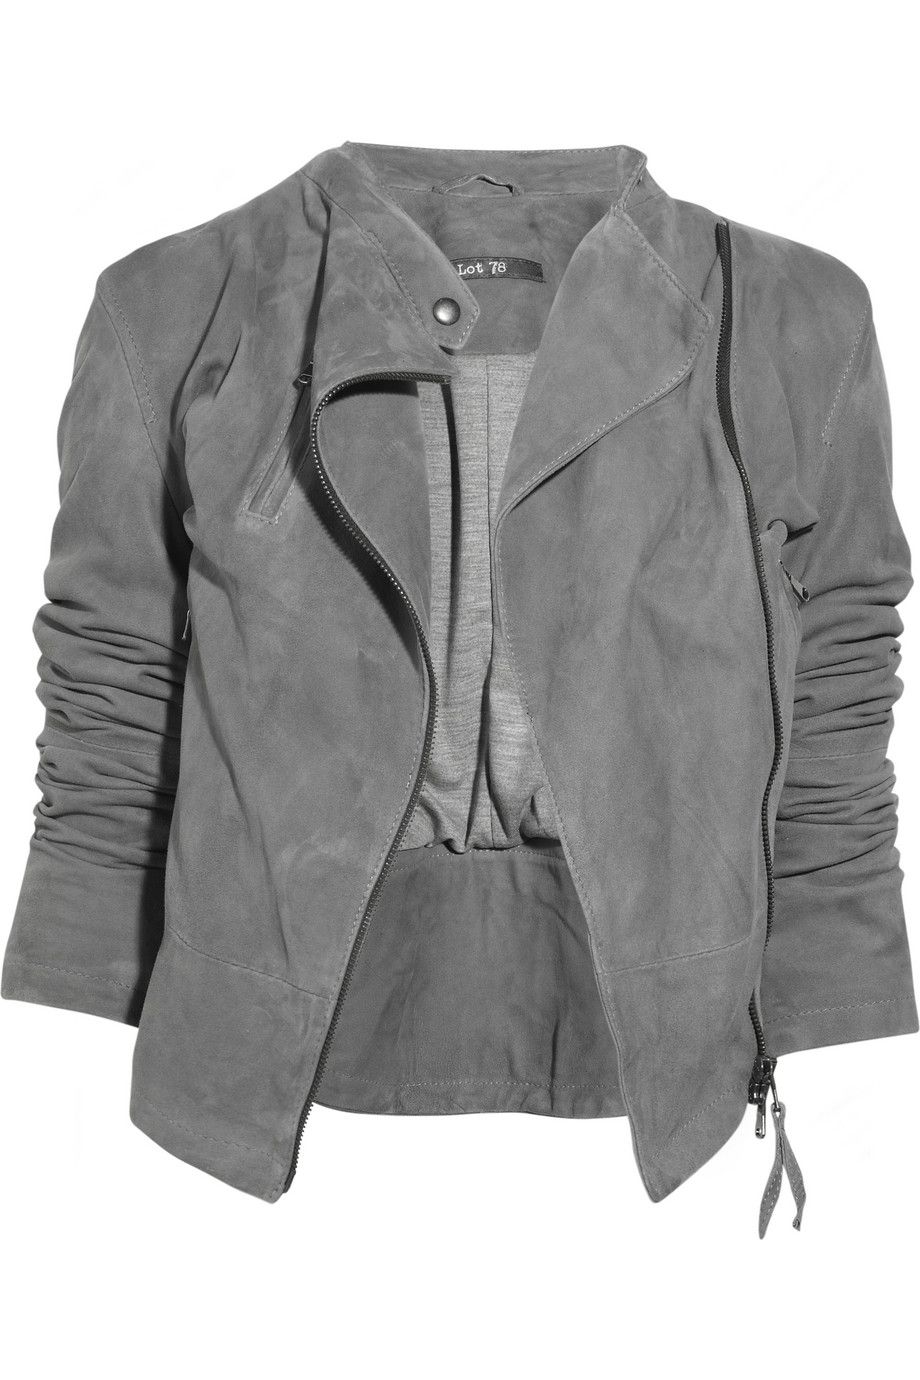 Get the best style with grey leather
jackets